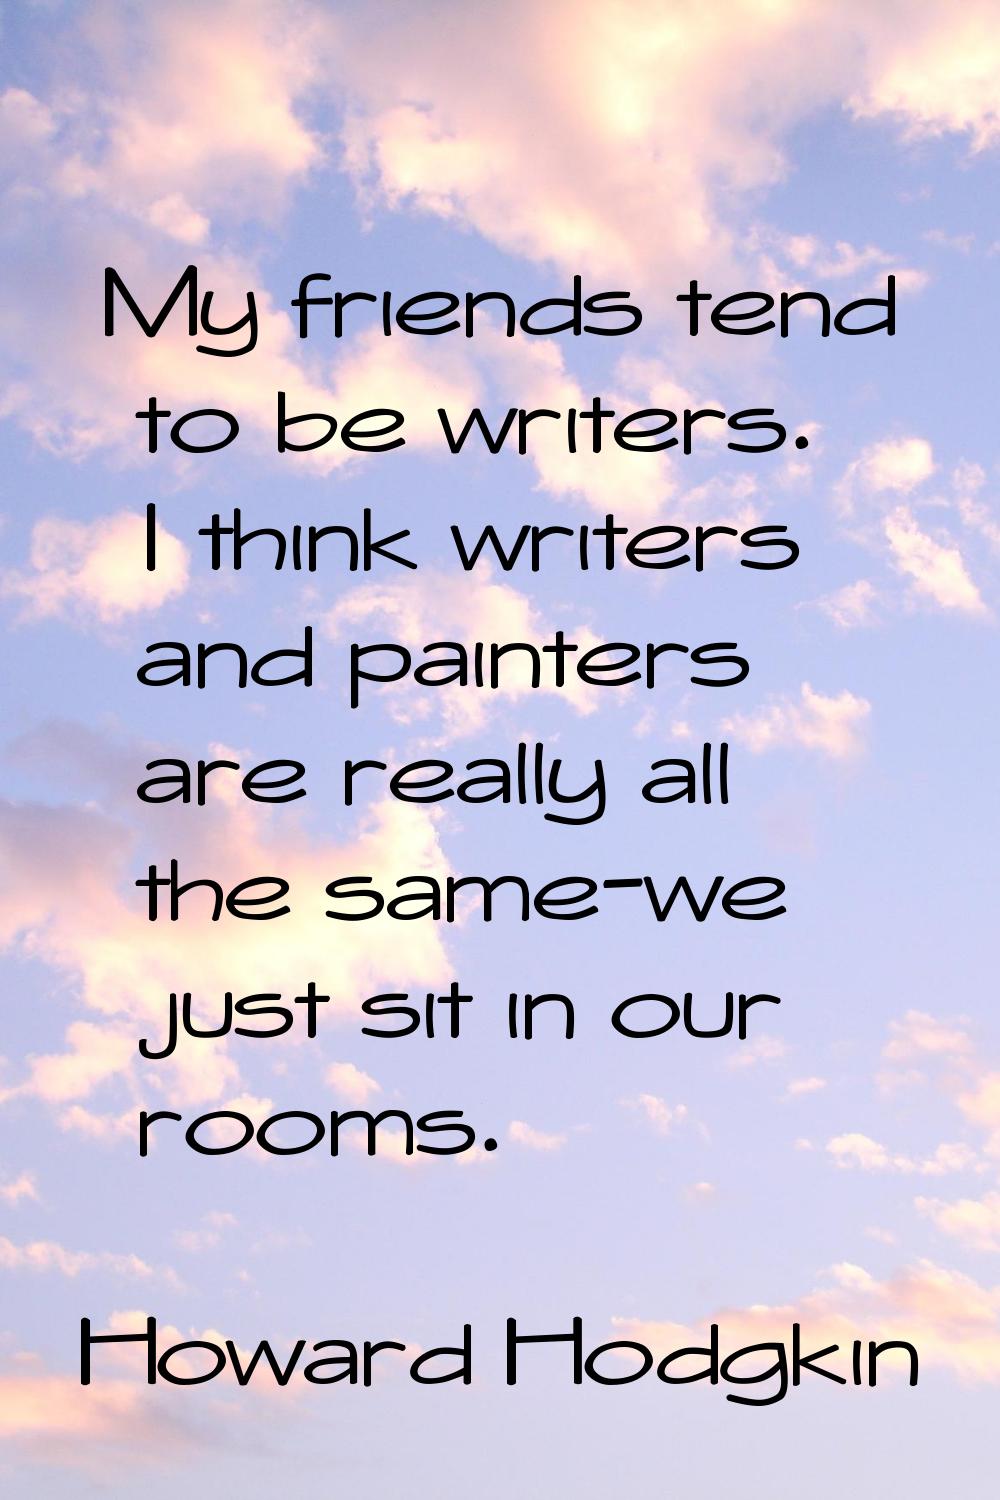 My friends tend to be writers. I think writers and painters are really all the same-we just sit in 